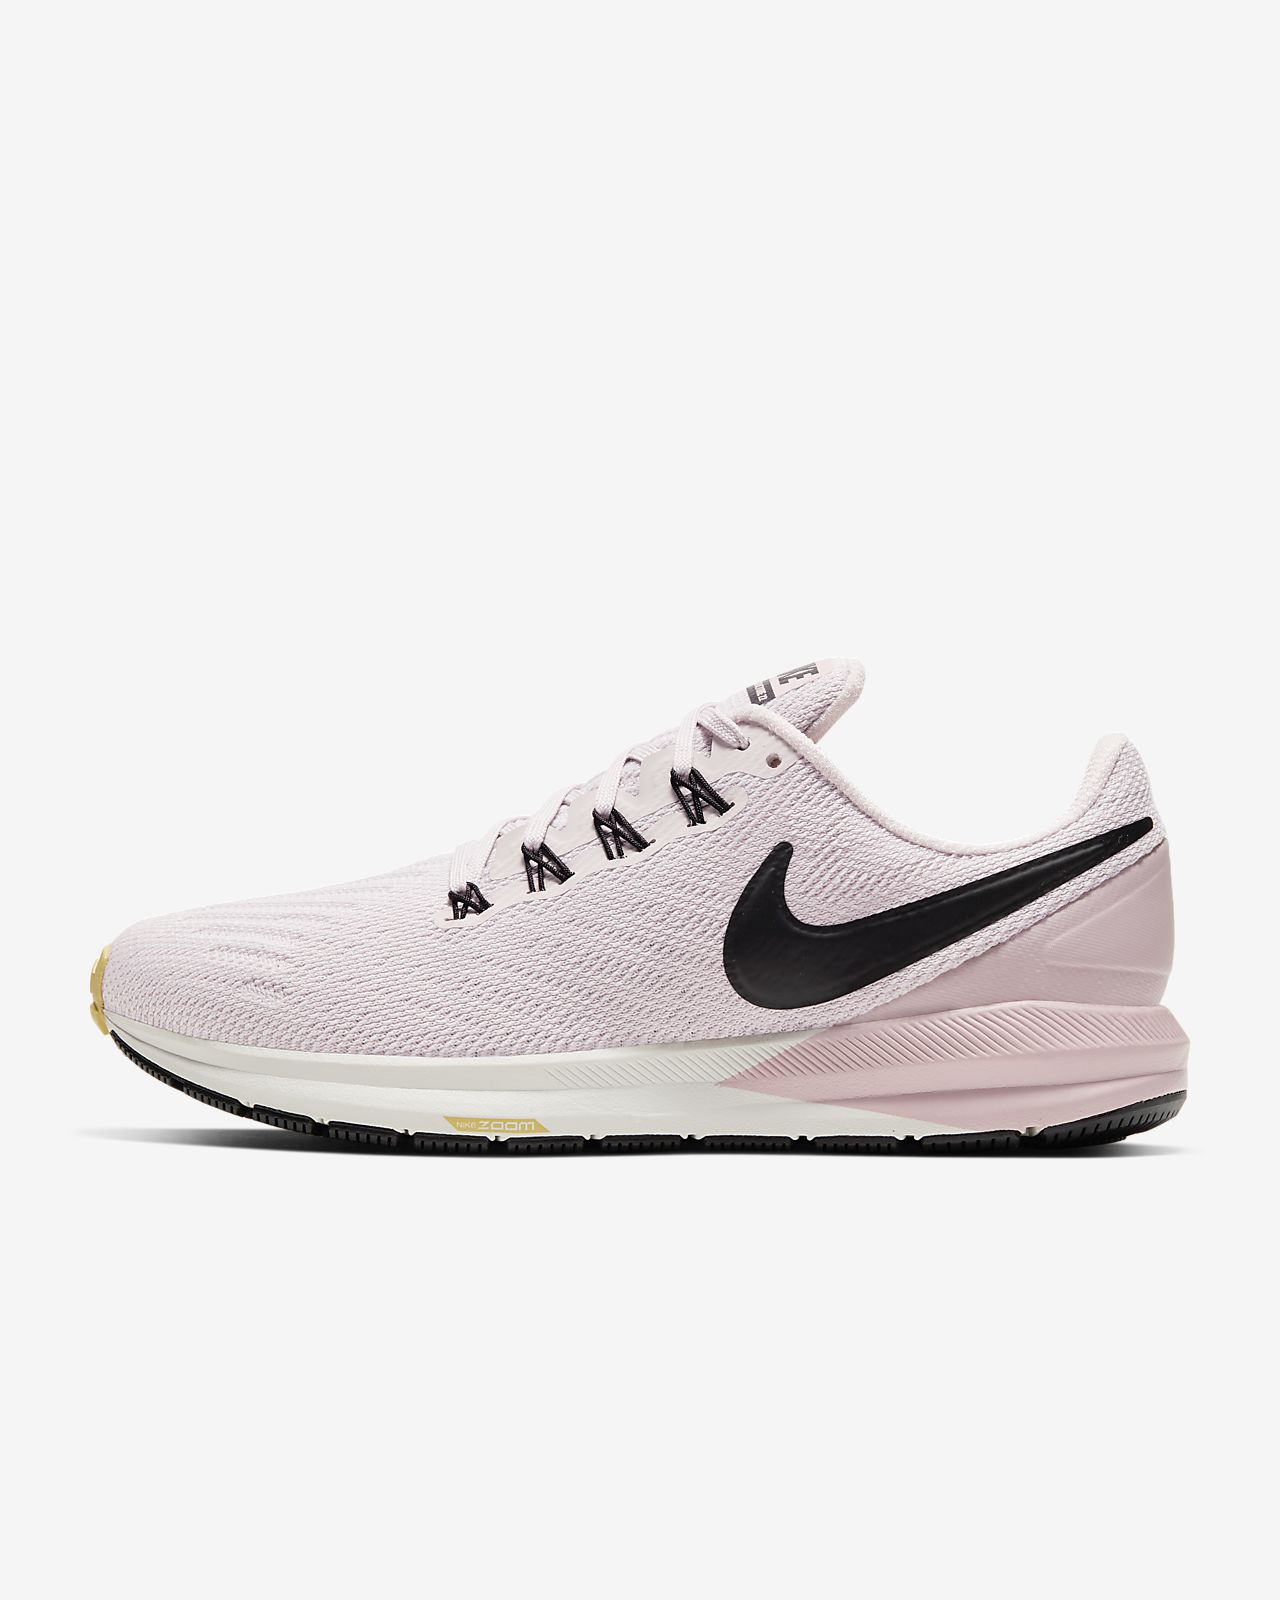 nike zoom structure 22 women's shoes